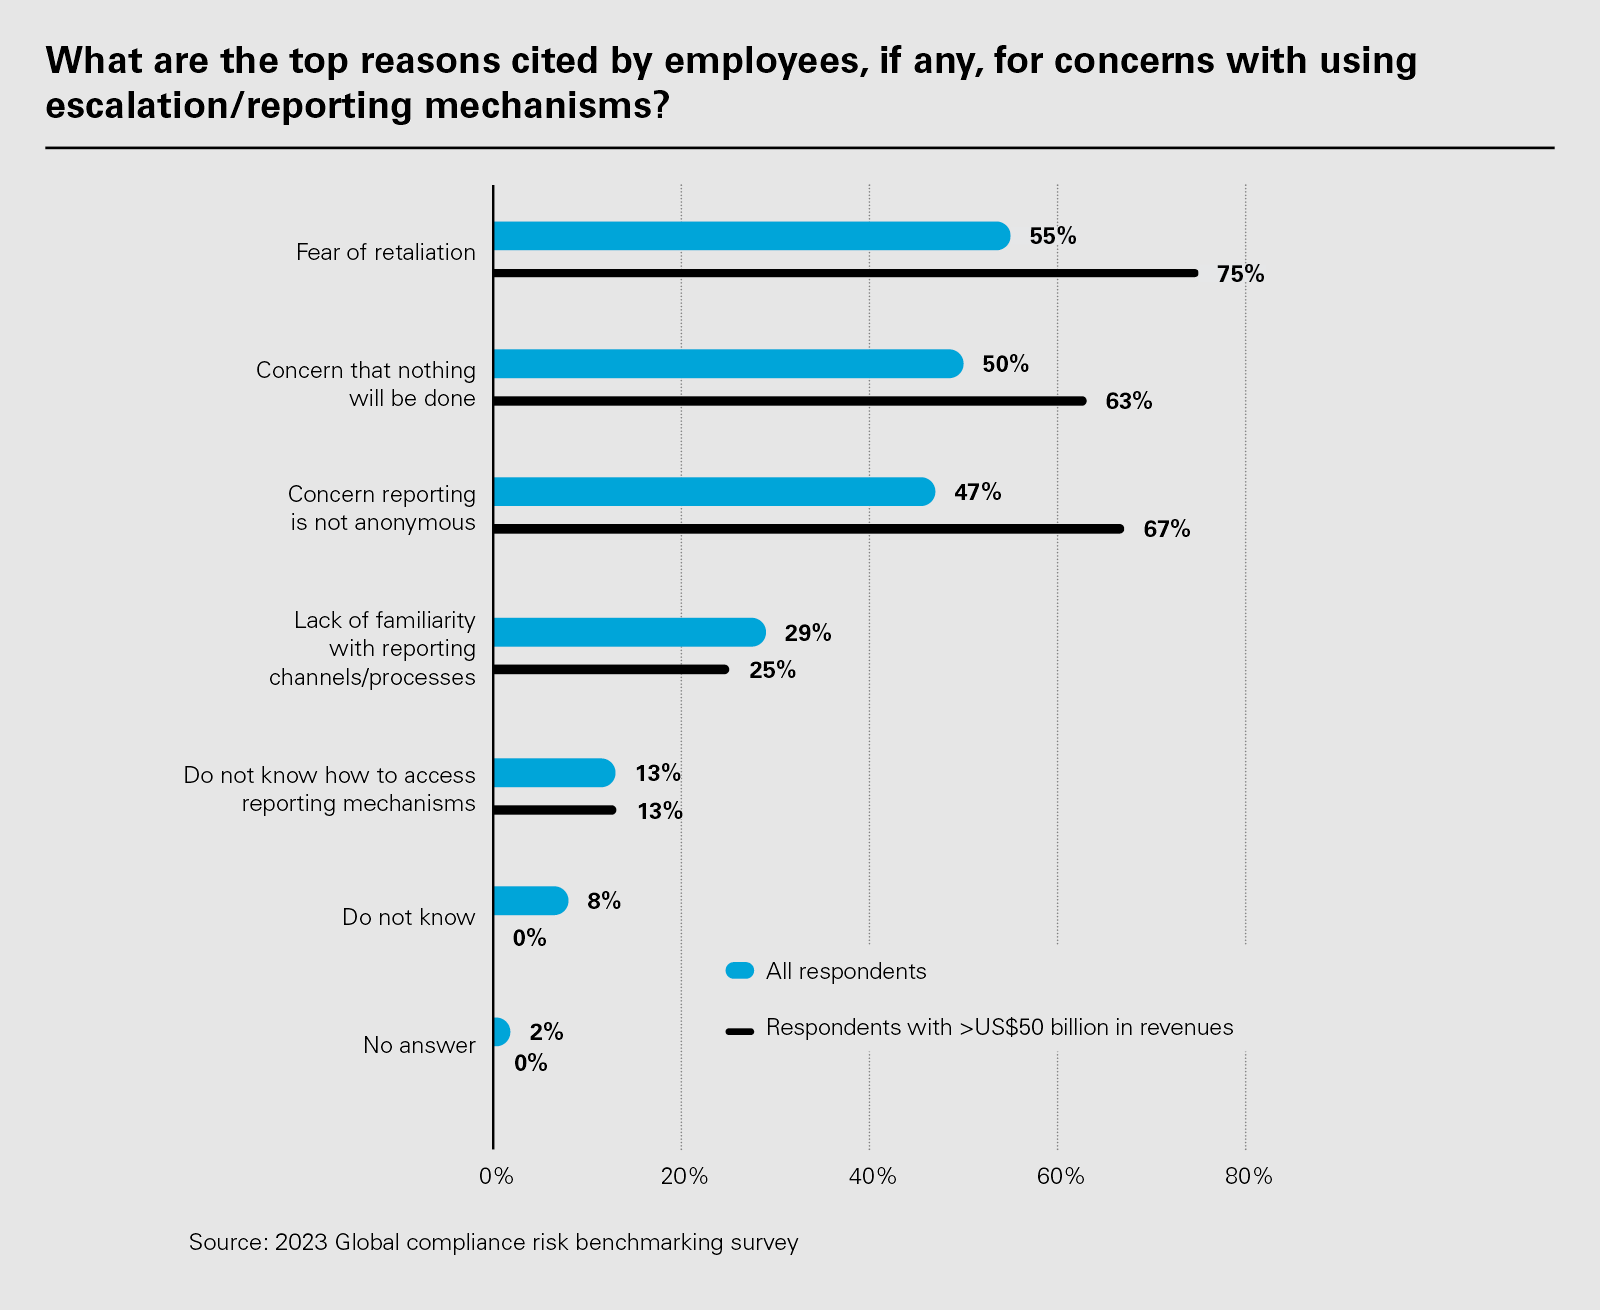 What are the top reasons cited by employees, if any, for concerns with using escalation/reporting mechanisms?